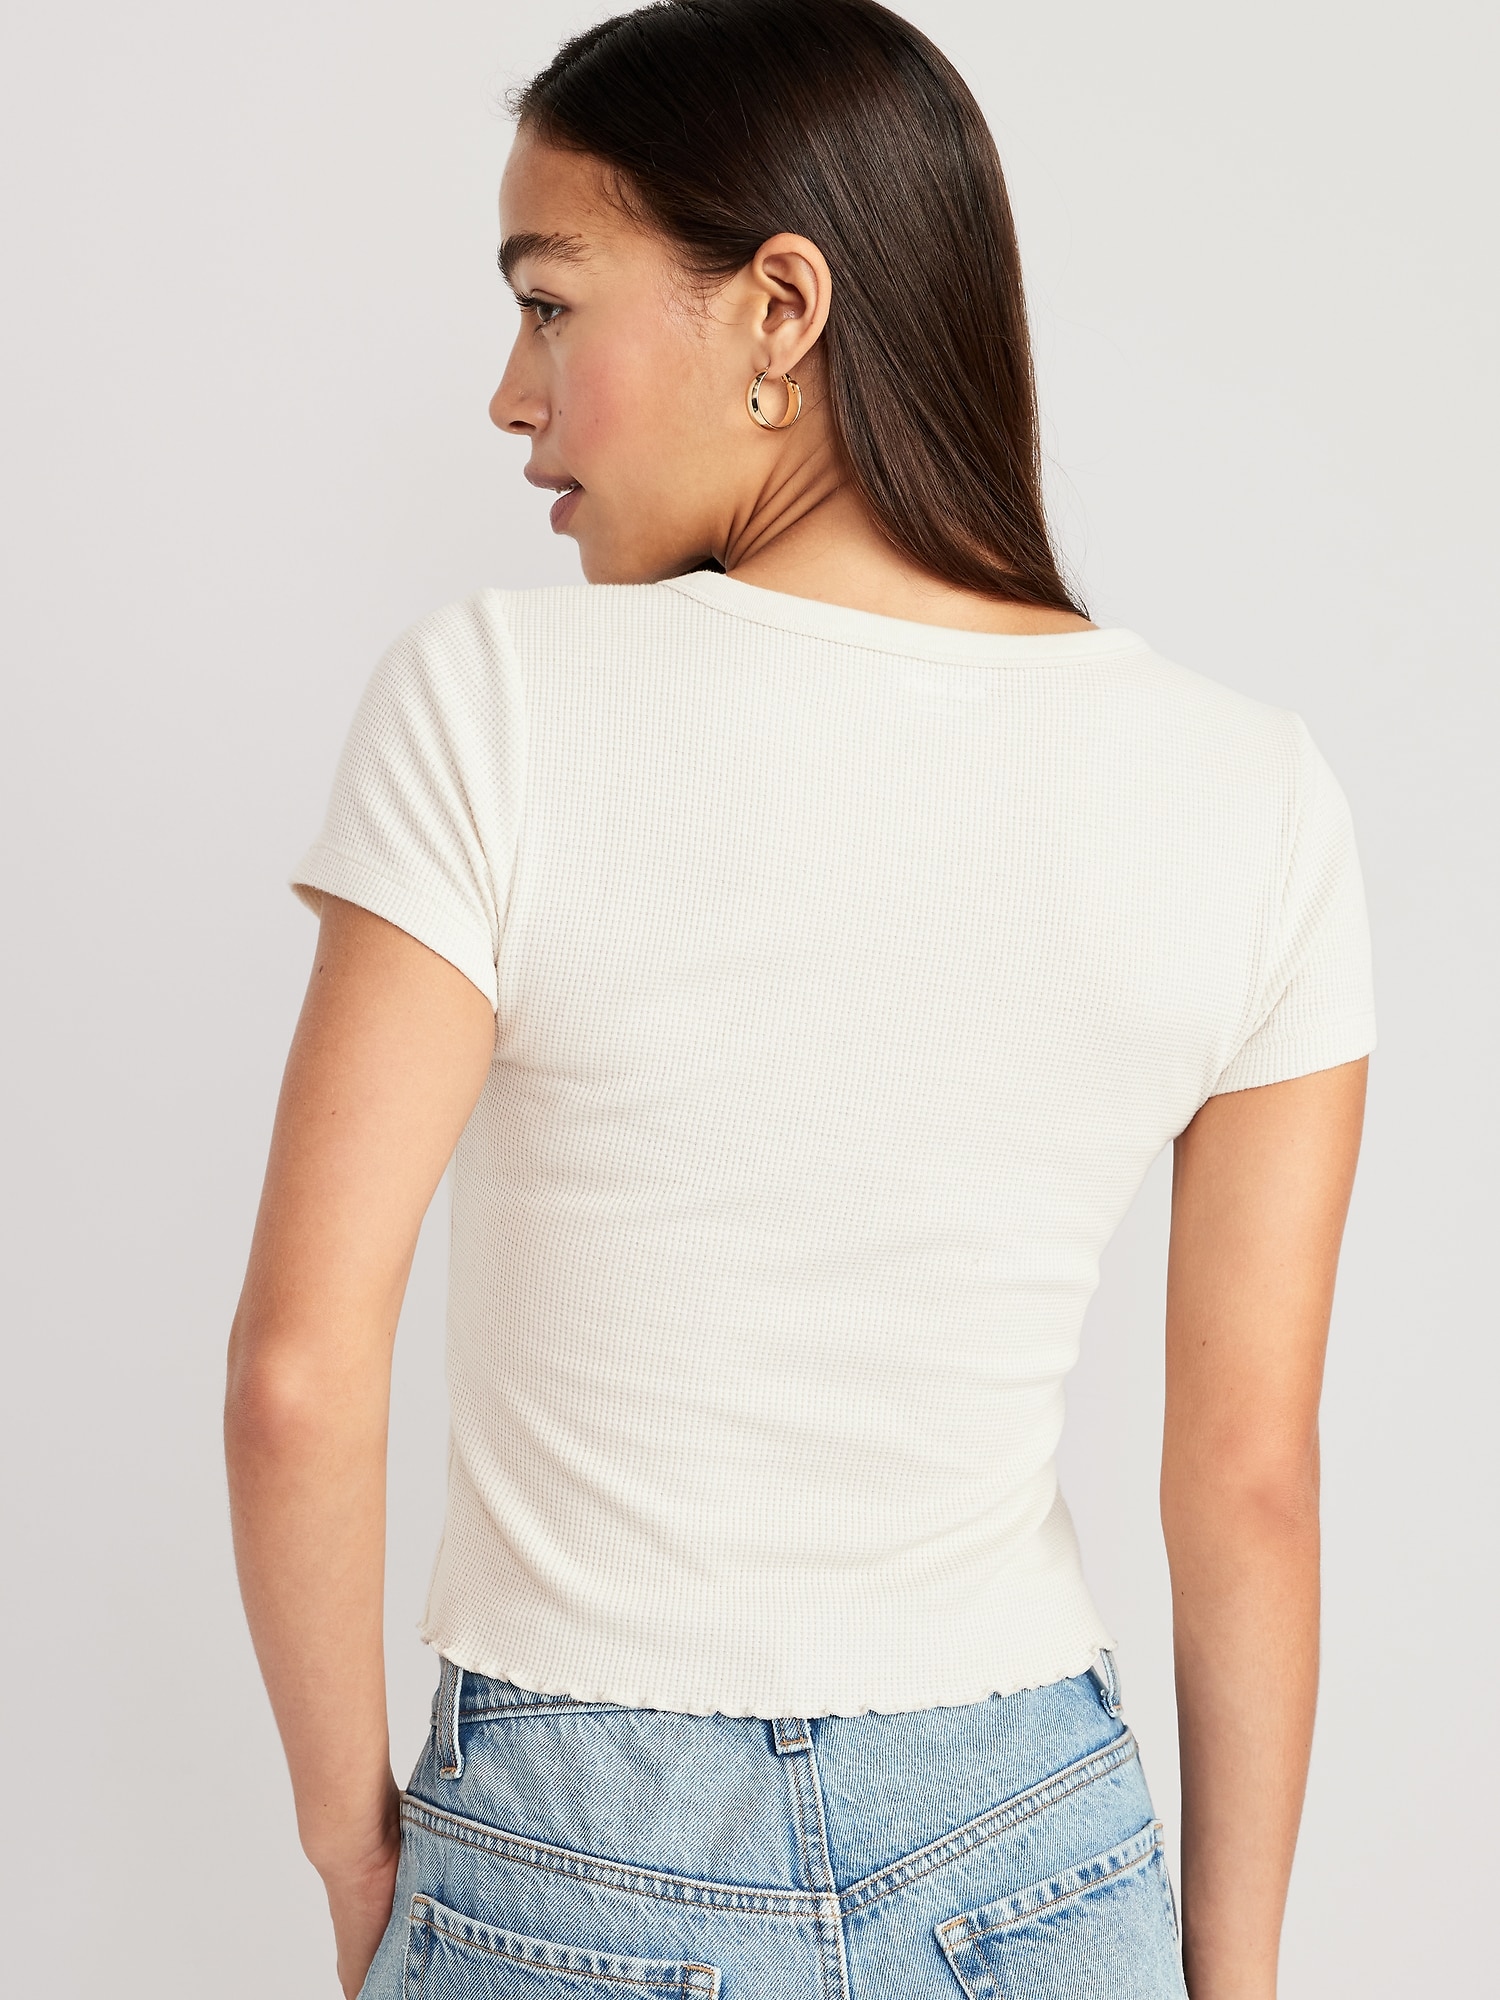 Lettuce-Edge Thermal-Knit Cropped T-Shirt for Women | Old Navy